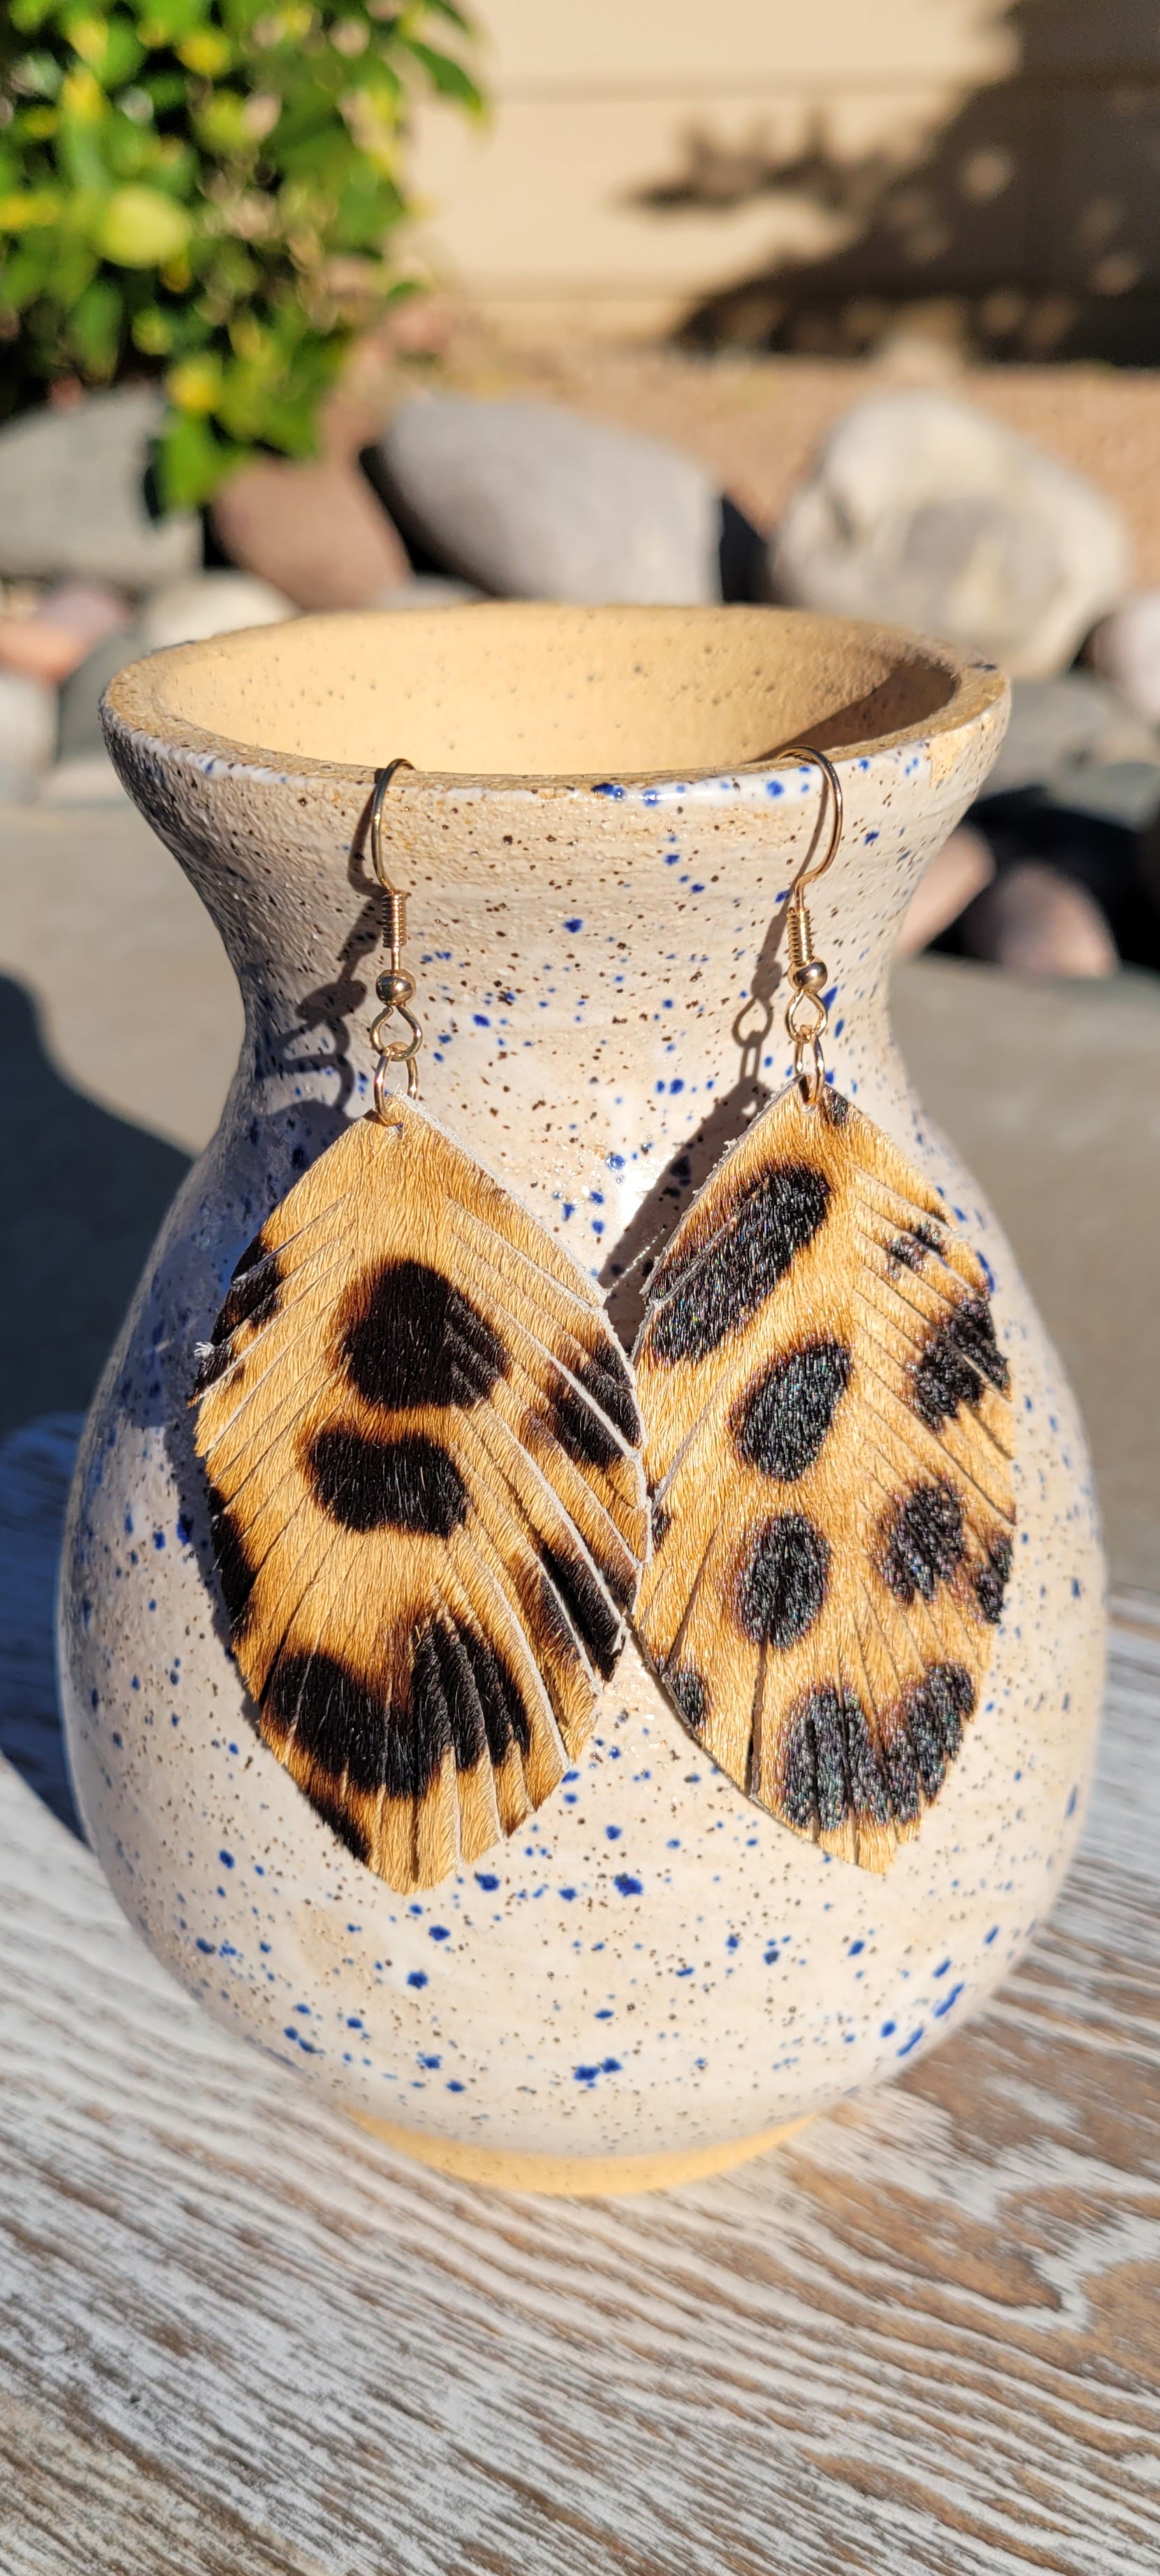 Marquise shape Genuine leather Leopard print Feathered fringe Brushed gold fish hook dangle earrings Rubber earring back Drop length 2.6”, width 1.5” Whether you want to be on the wild side or classy this earring set it will add a fun touch to your outfit